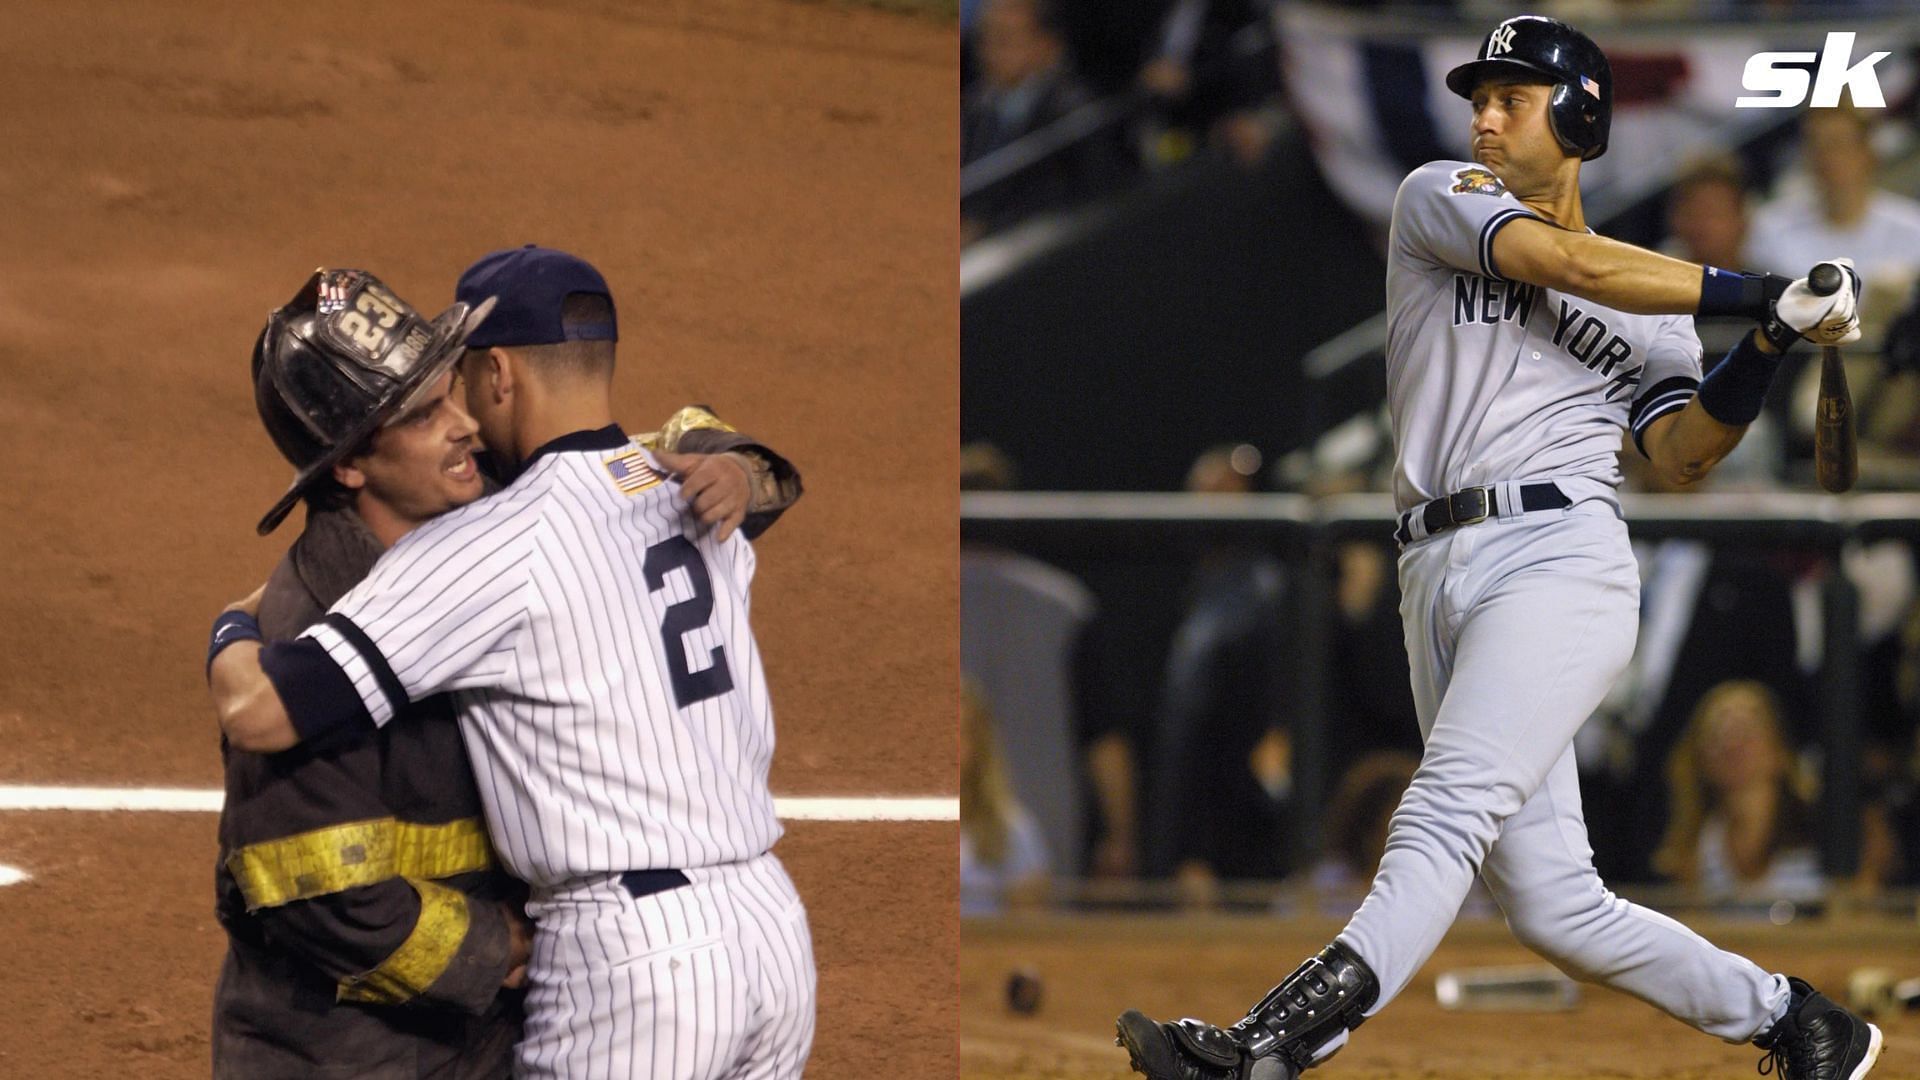 Derek Jeter posted a heartwarming tribute to the tragic events of 9/11